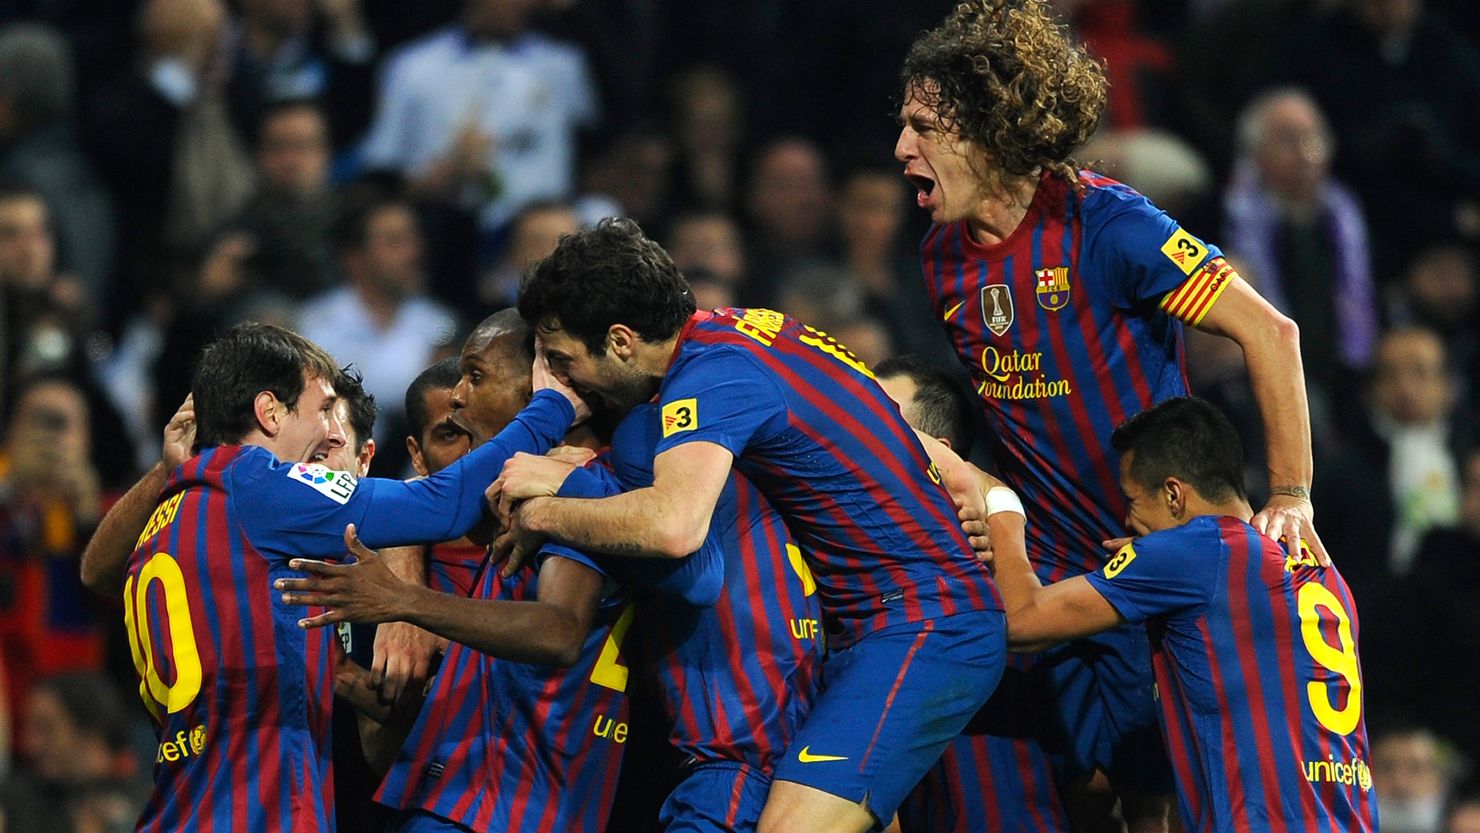 Eric Abidal celebrates after his goal secured a 2-1 victory for Barcelona over Real Madrid in the Spanish Cup.